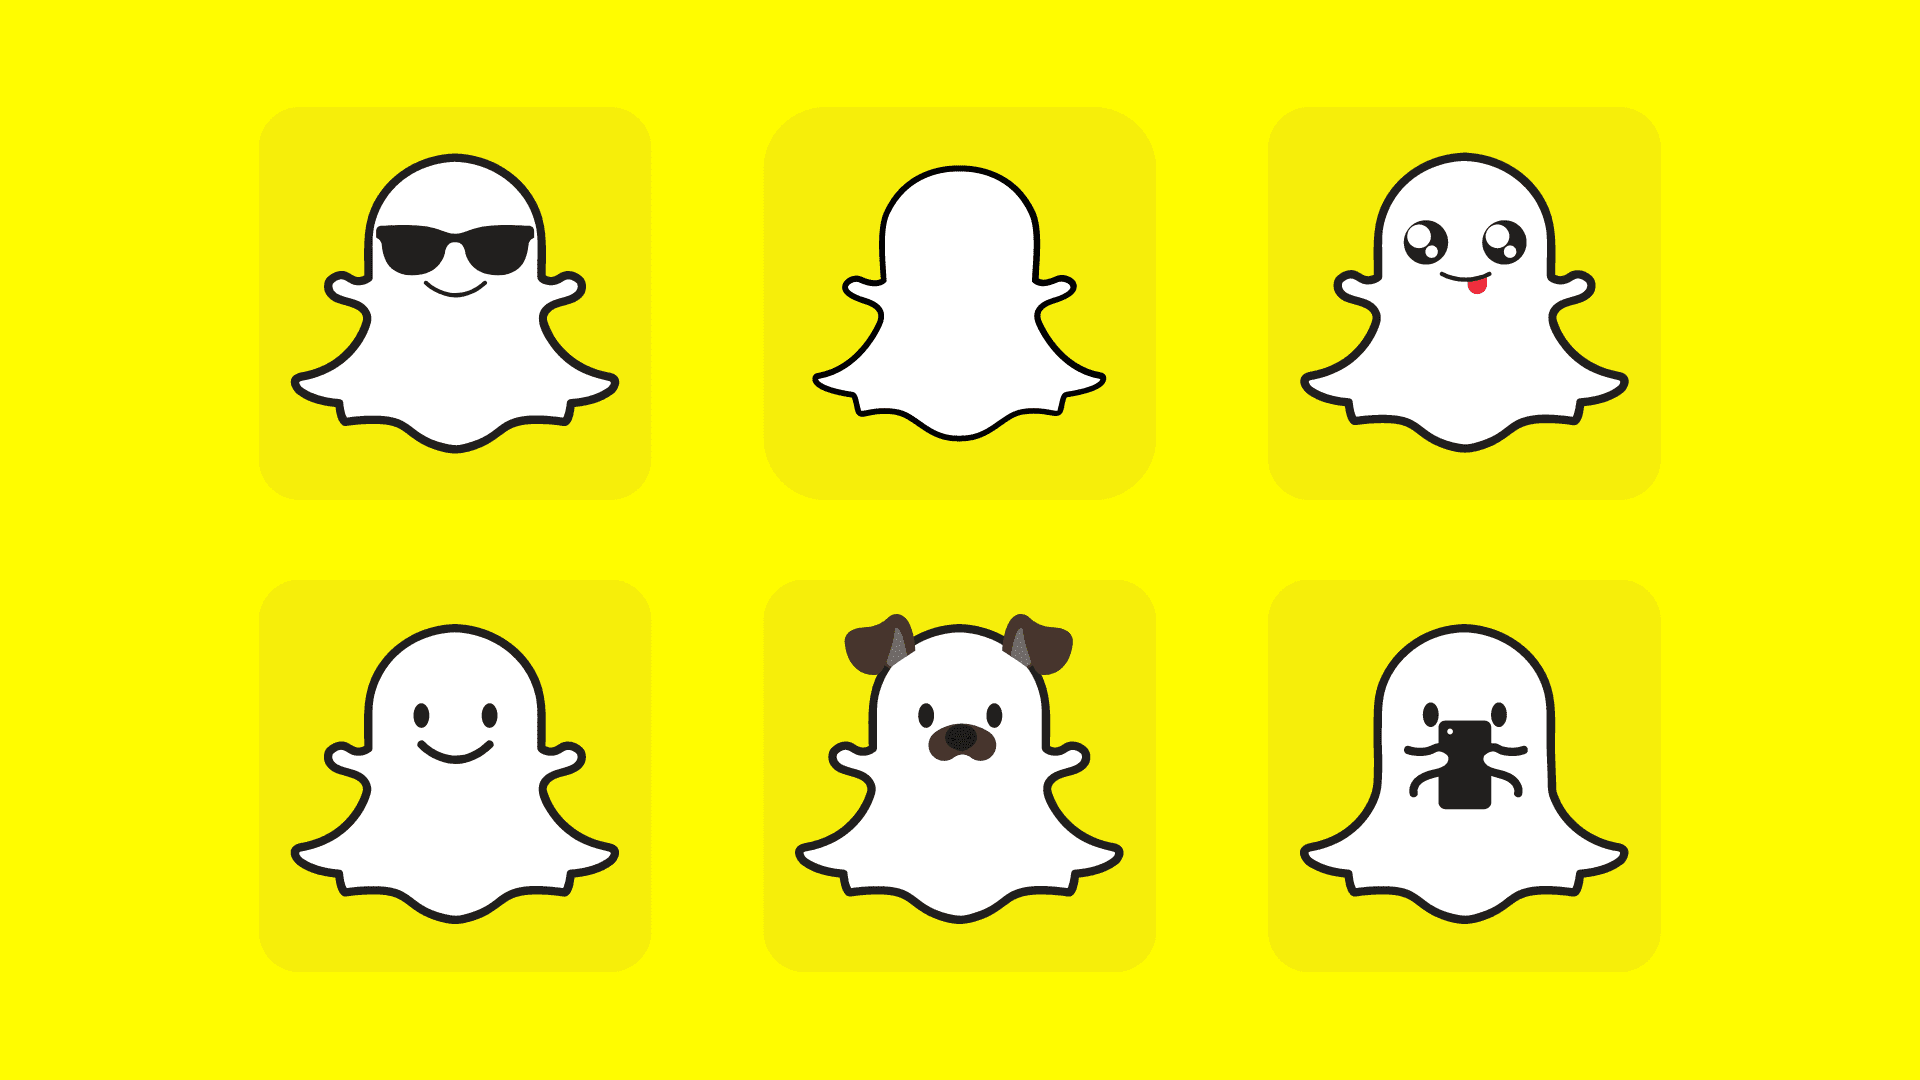 Several Snapchat icon avatars on a yellow background to signify group chat